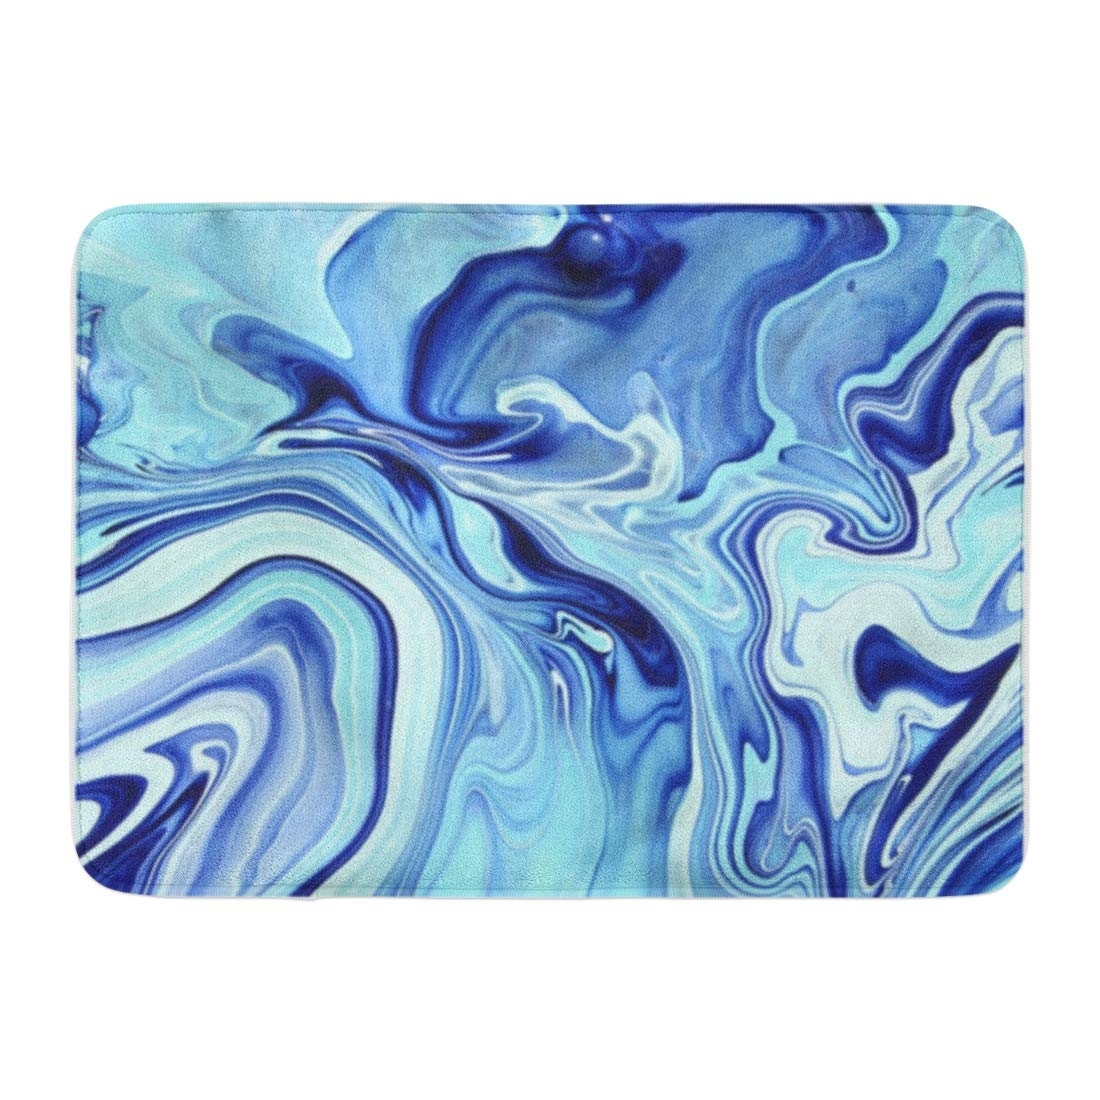 Texture Blue Marble Stone Water Abstract Black Paper Pattern Acrylic ...